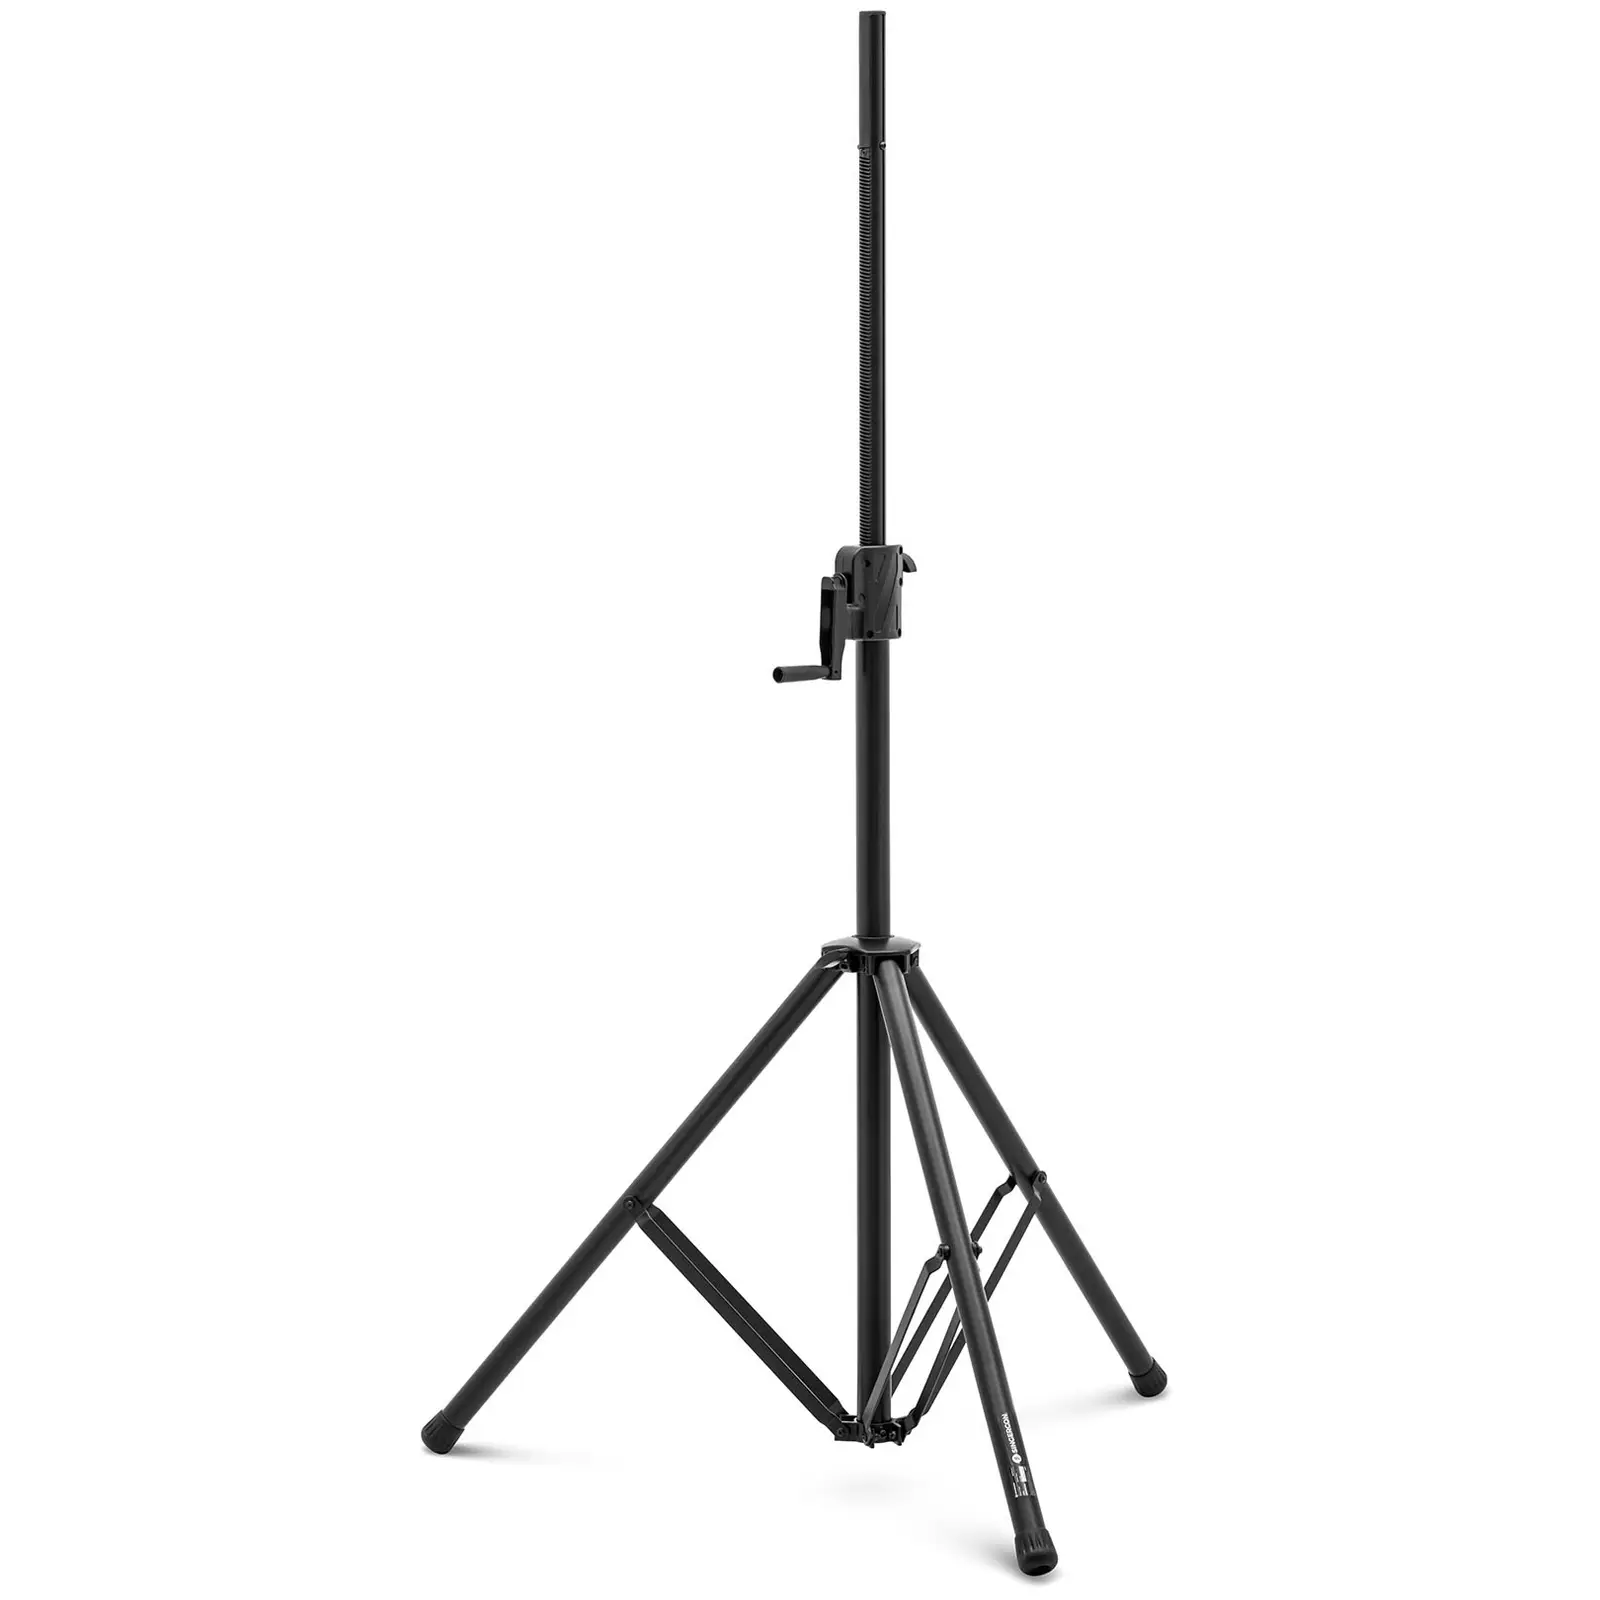 Floor Speaker Stand - 1 pair - up to 40 kg - 83 to 115 cm